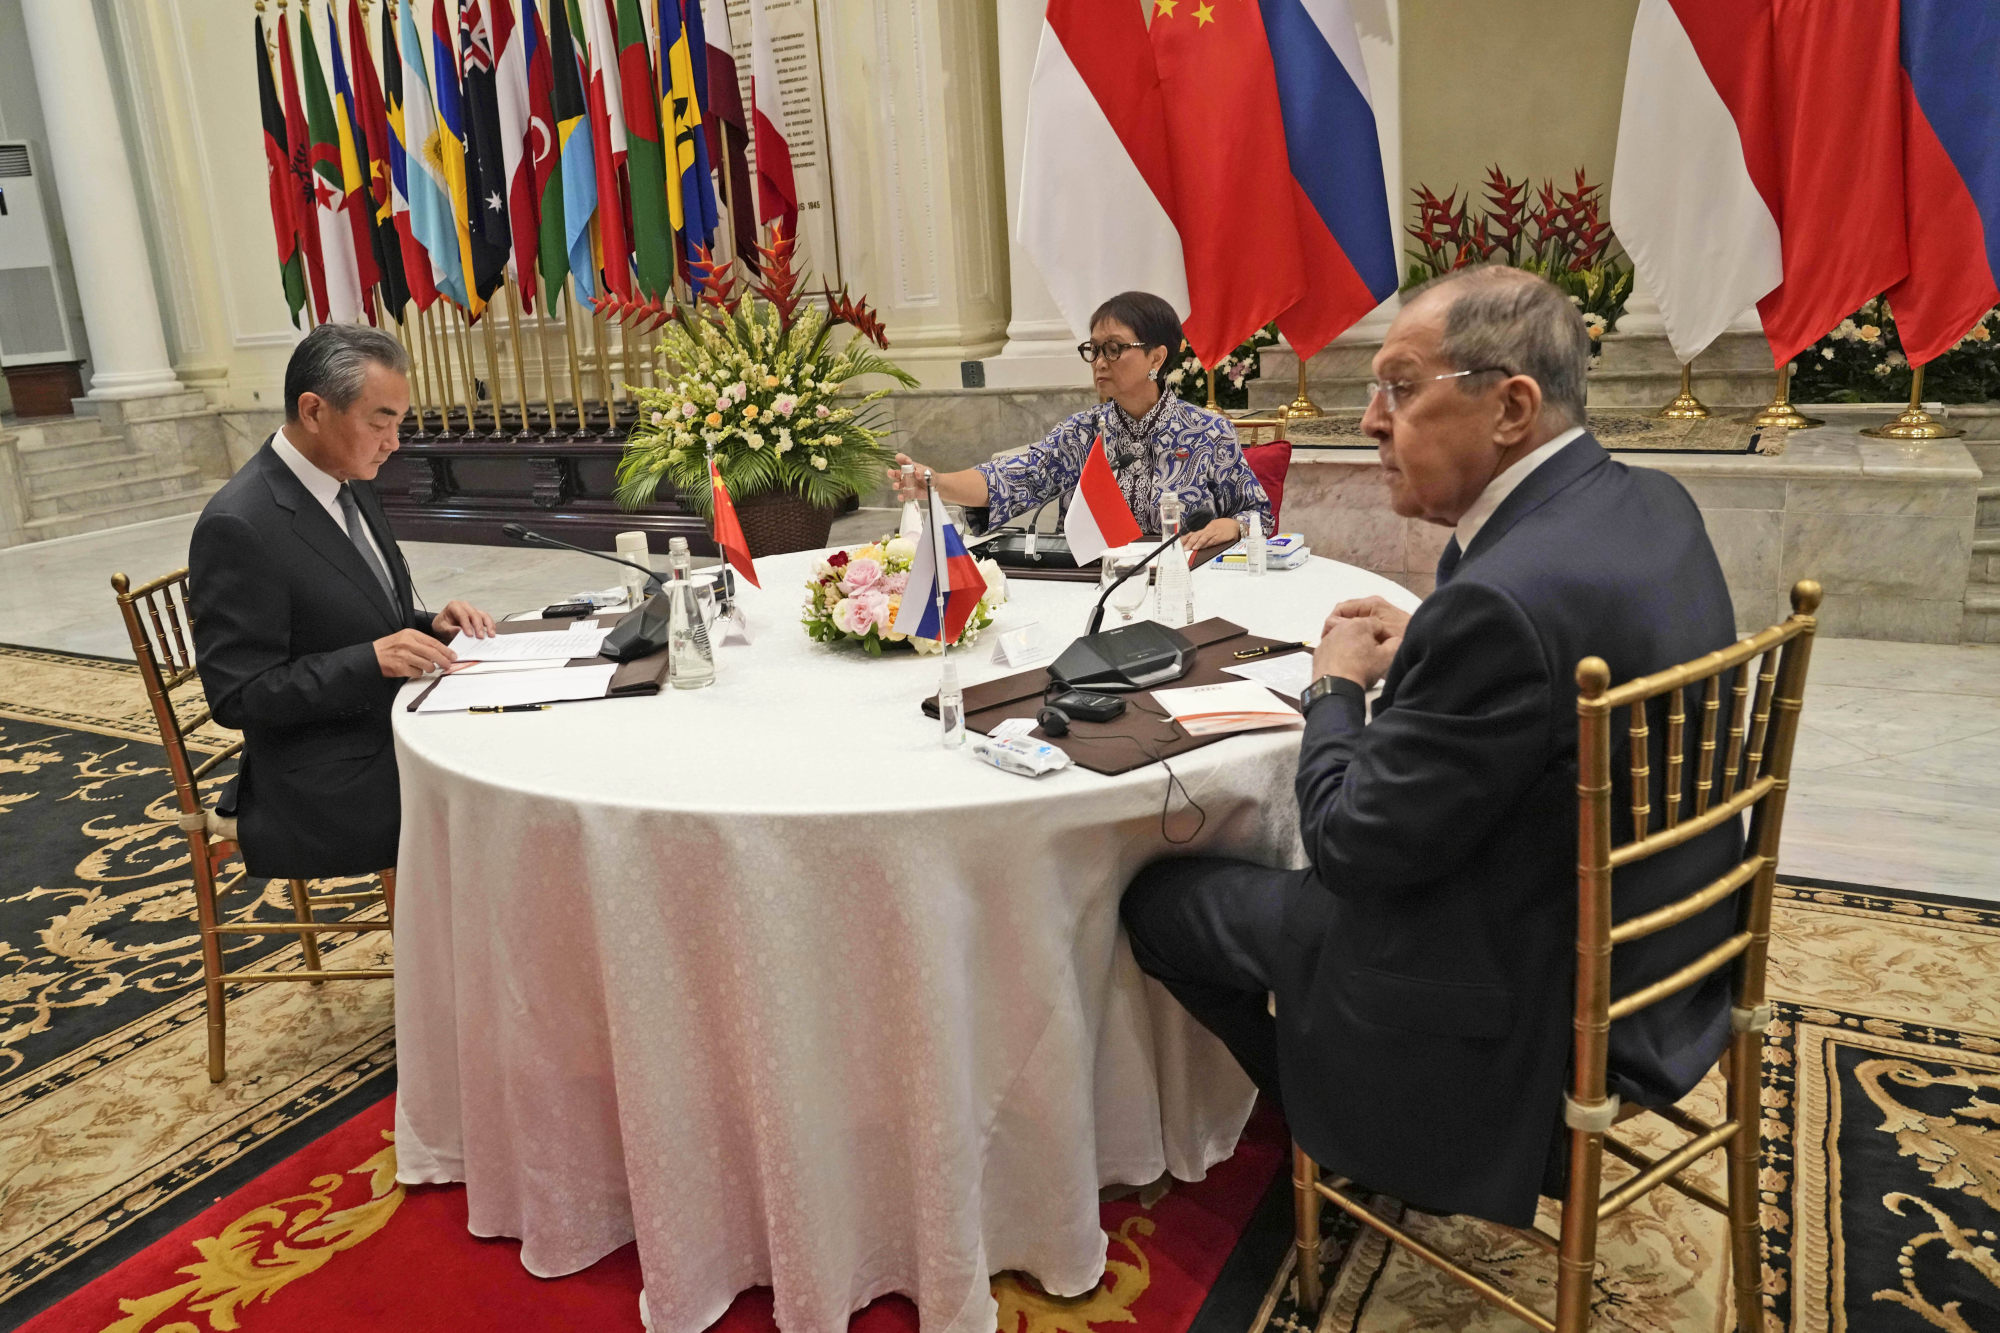 China’s top diplomat Wang Yi, Indonesian Foreign Minister Retno Marsudi and Russian Foreign Minister Sergey Lavrov meet in Jakarta on Wednesday. Photo: AP